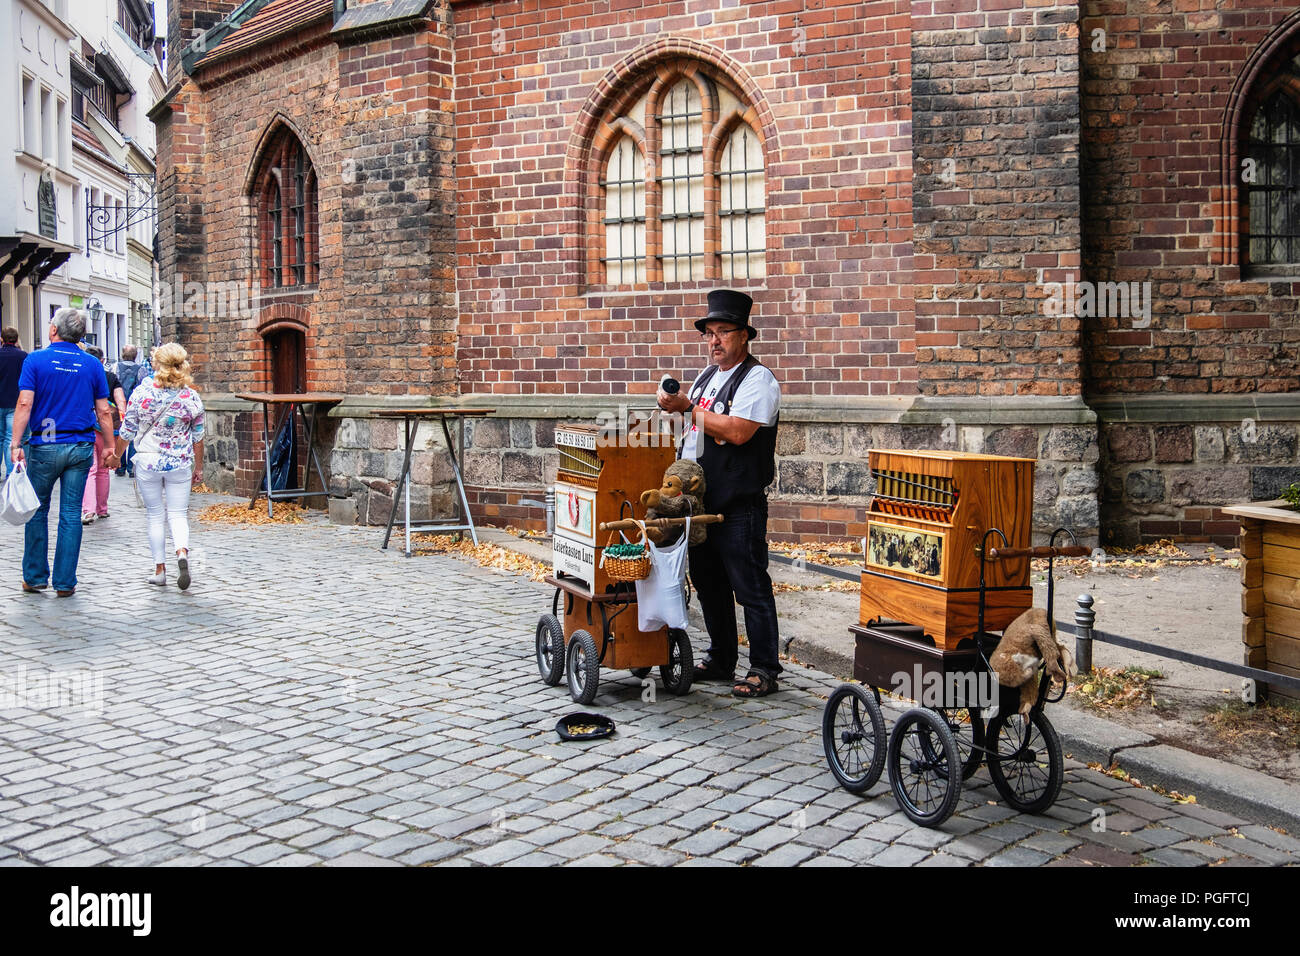 Berlin, Germany. 25 August 2018.  Nikolai Festival, Nikolaifestpiele, historic festival relates the history of Berlin from the Rococo to the Industrial era. The fifth Nikolai Festival entertains with street music, plays & poetry and people wearing period dress visit the Nikolai quarter. The historic market square has numerous stalls displaying traditional crafts and goods. Credit: Eden Breitz/Alamy Live News Stock Photo